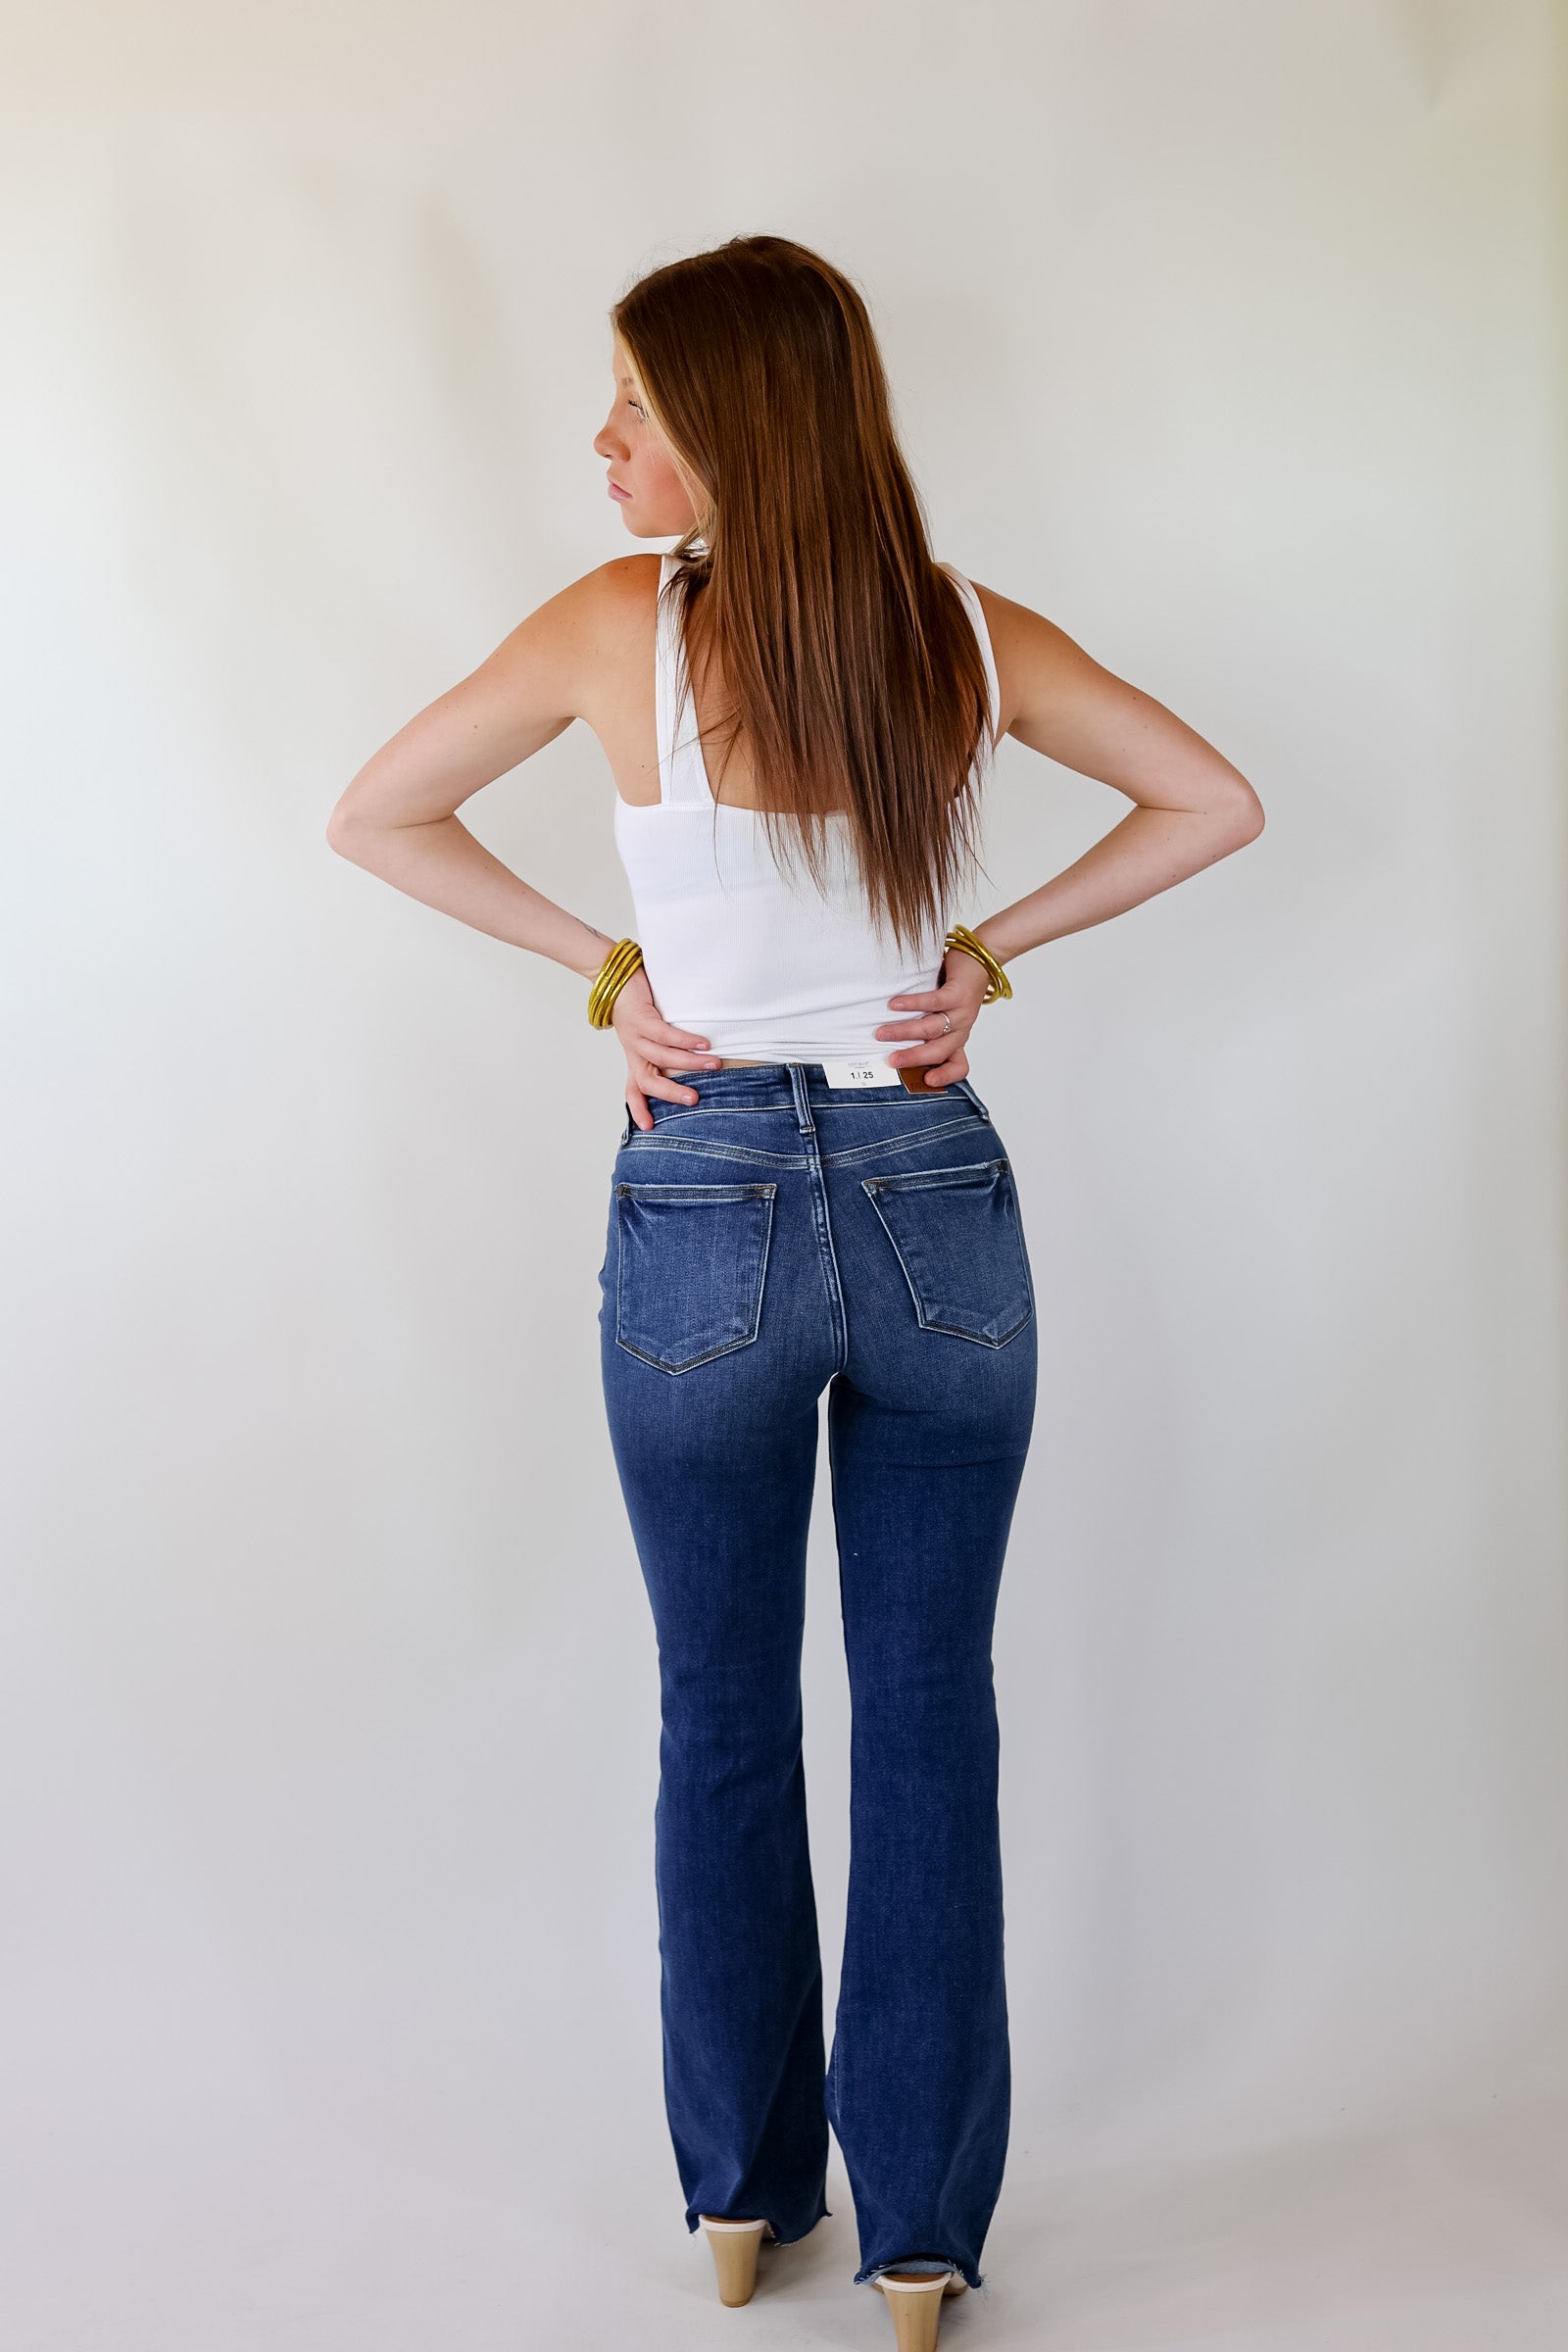 Judy Blue | Friday Feels Raw Hem Bootcut Jeans in Dark Wash - Giddy Up Glamour Boutique